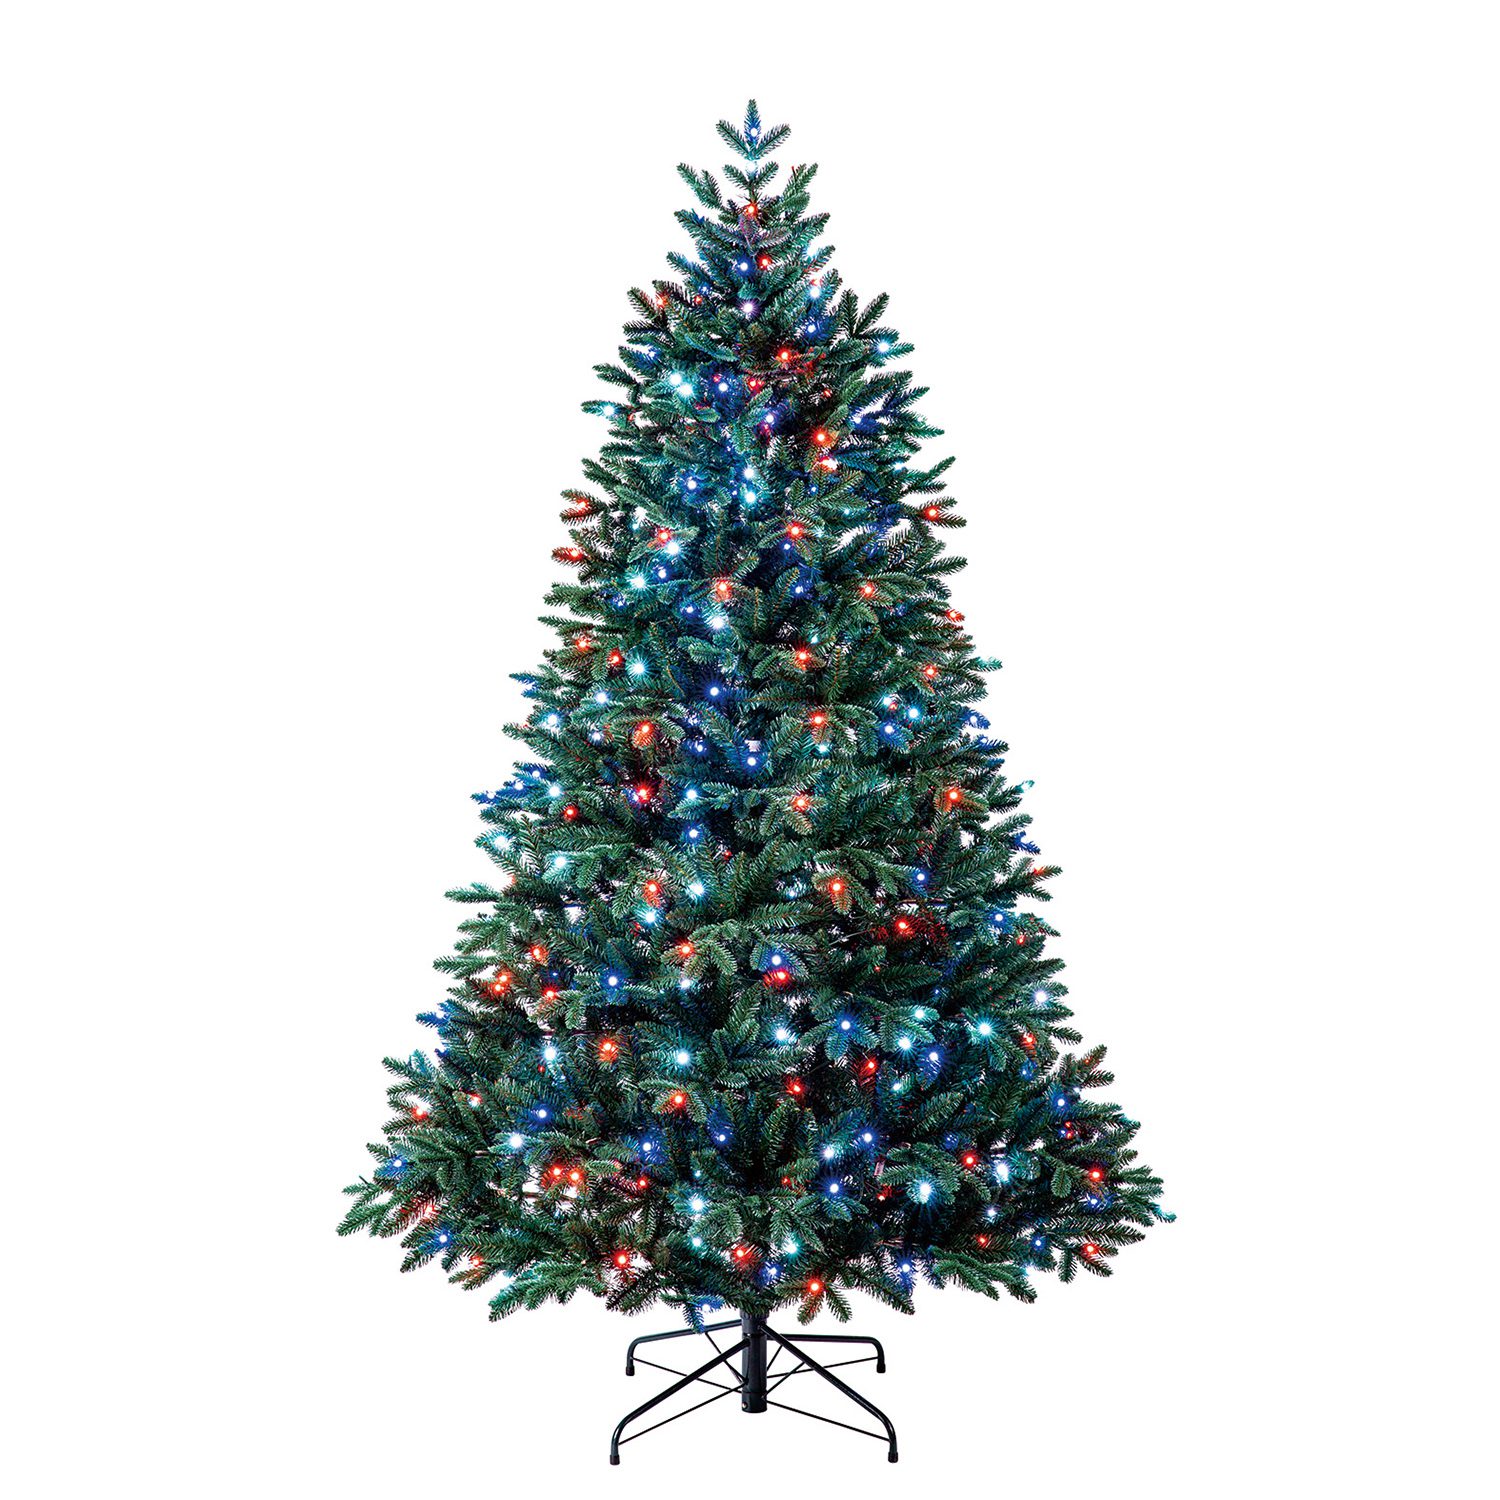 Twinkly Wellington Fir on white background